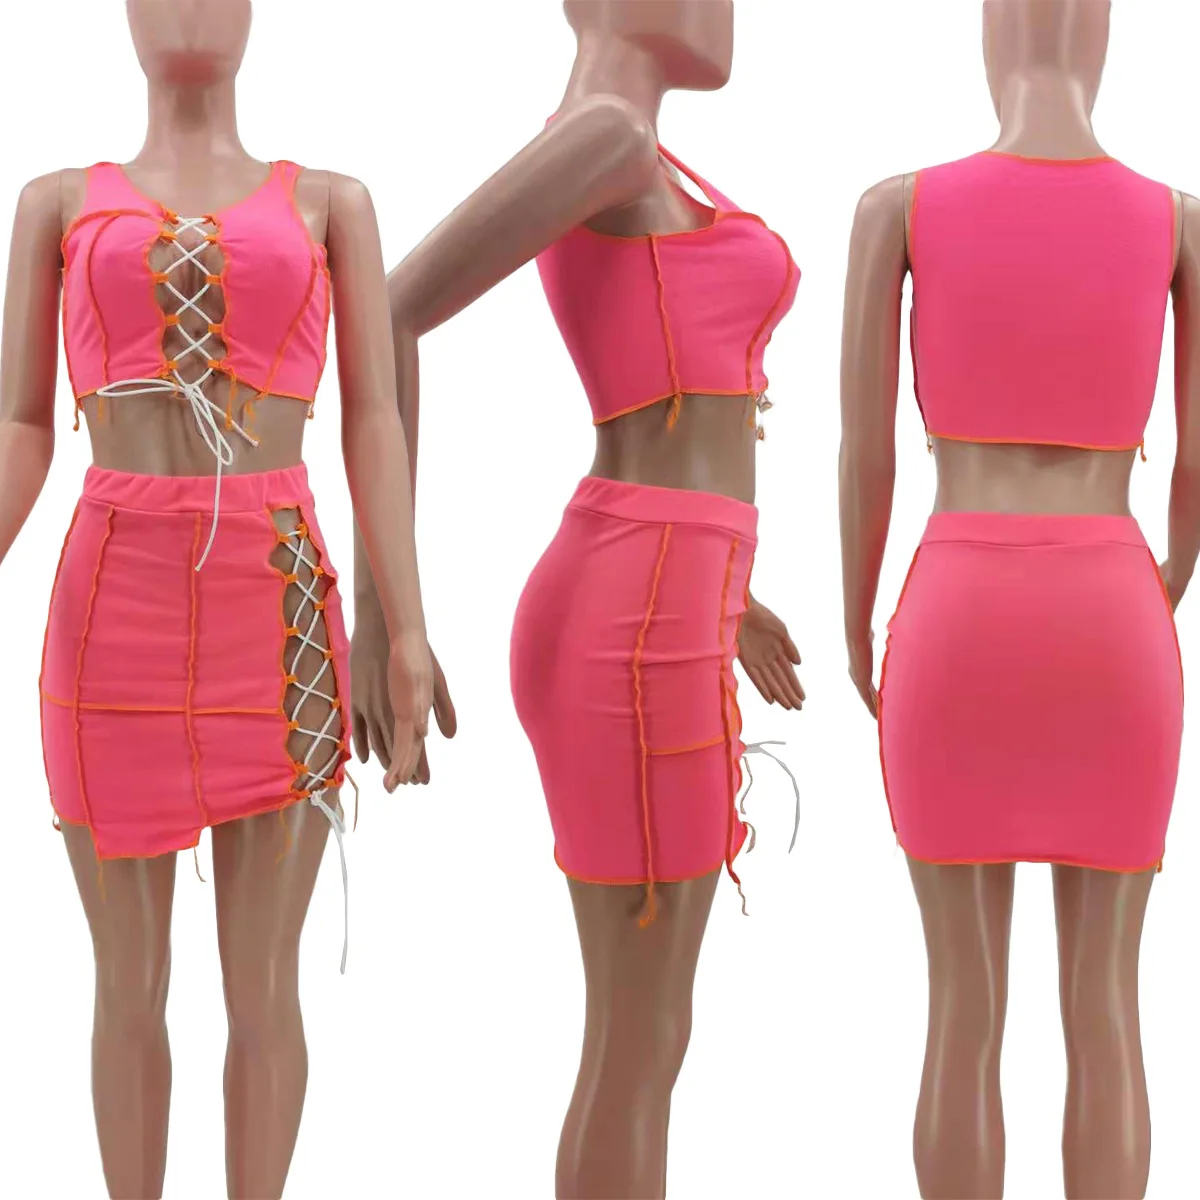 TK6161 Spring and summer two-piece ladies suit sexy strappy sleeveless woven vest over-the-knee lace mini skirt fashion casual